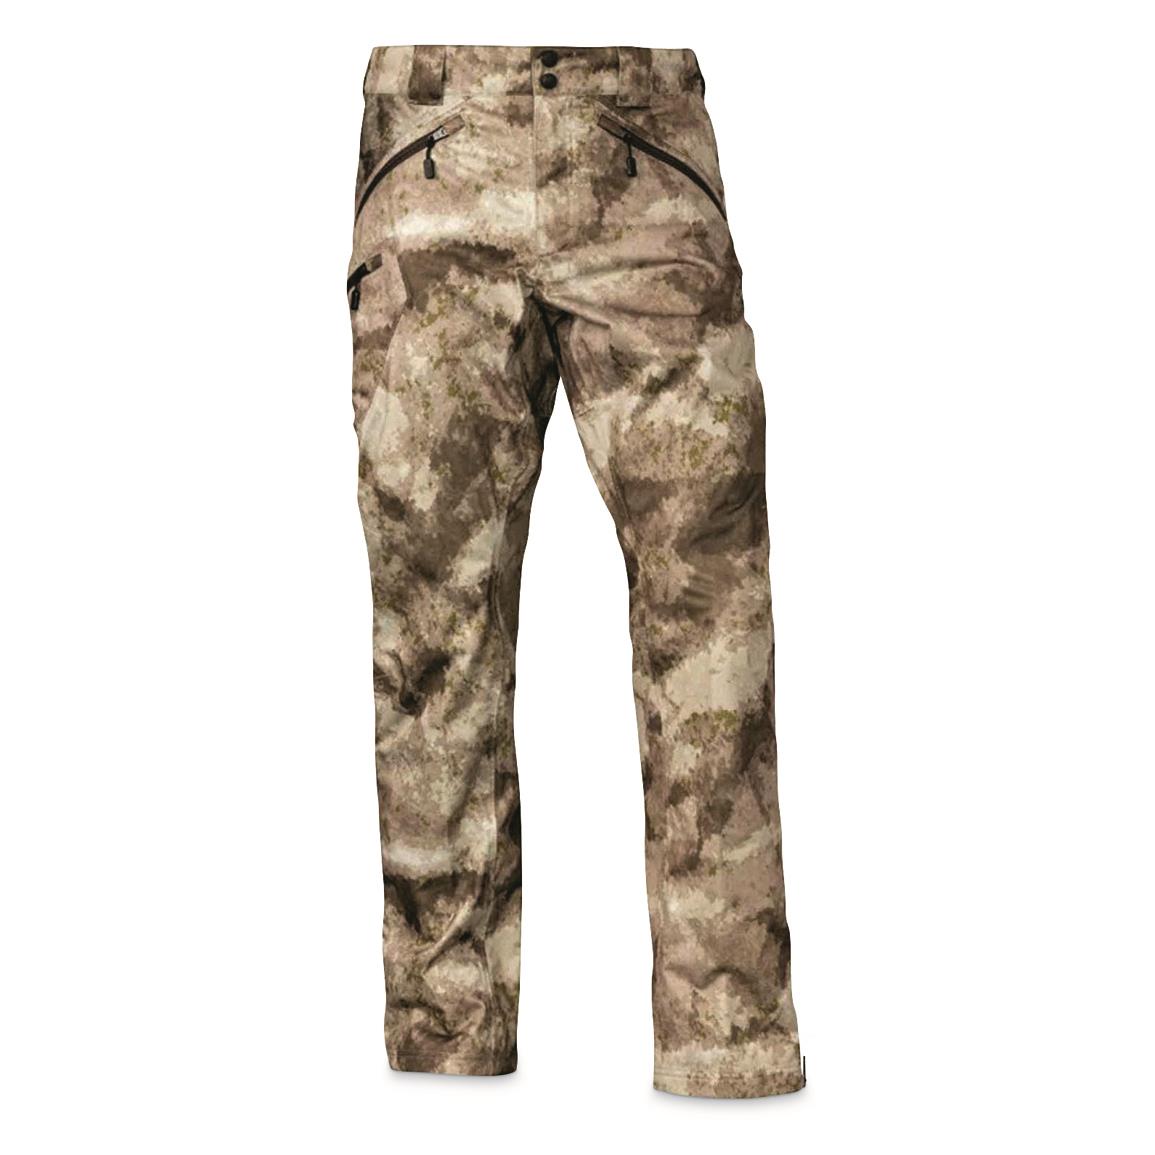 Browning Men's Hell's Canyon Speed Rain Slayer Hunting Pants, Au